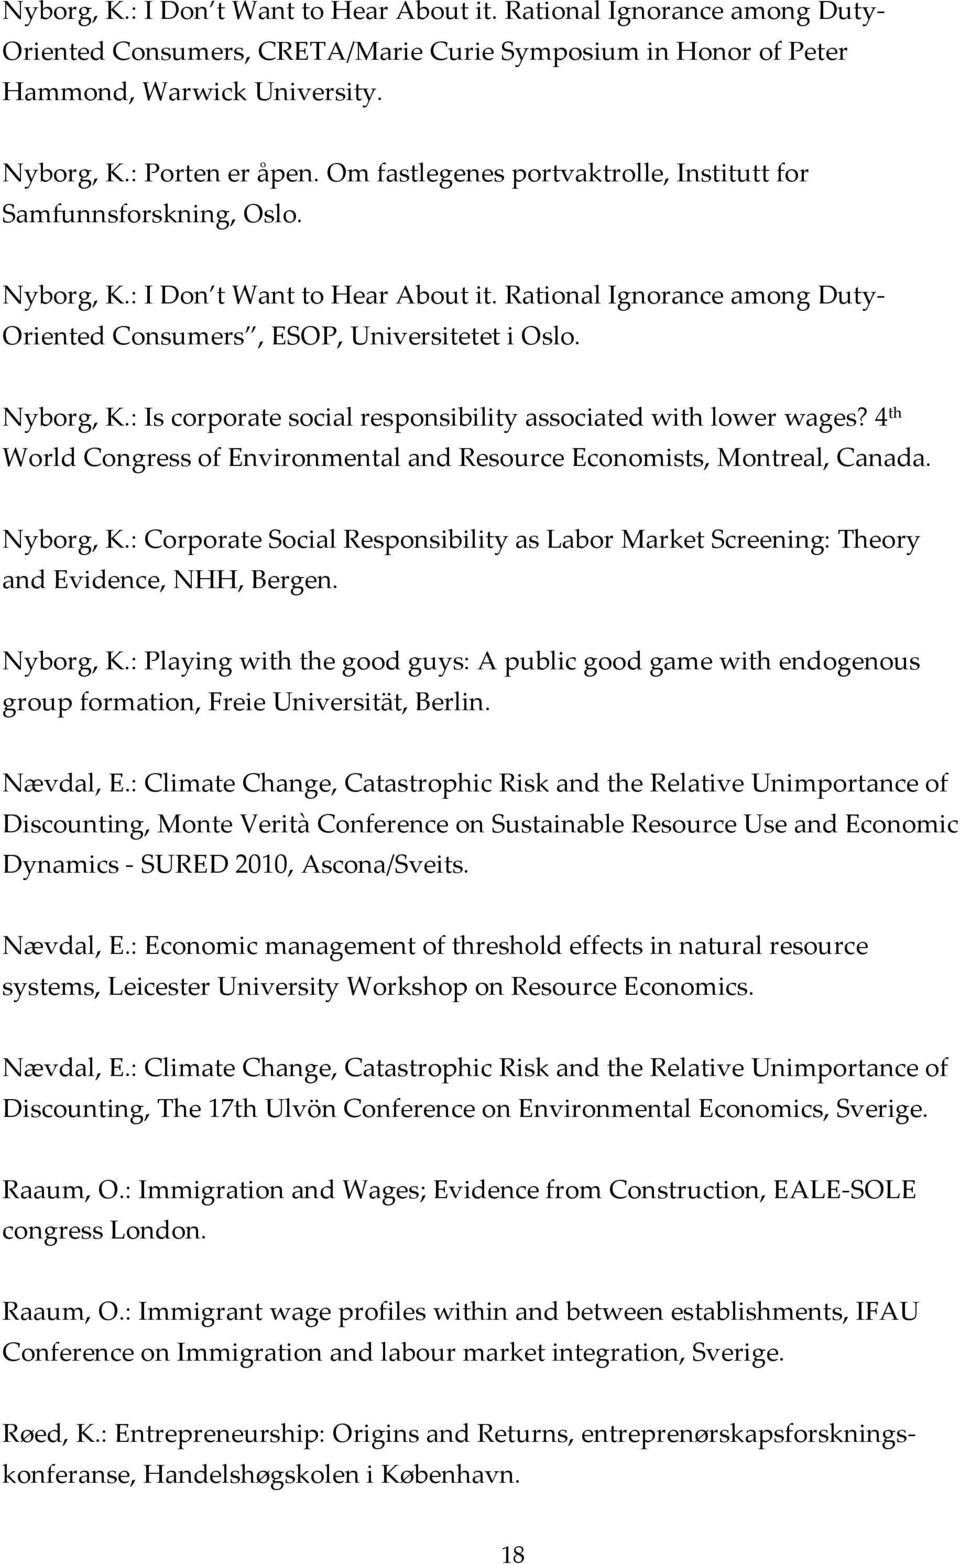 4 th World Congress of Environmental and Resource Economists, Montreal, Canada. Nyborg, K.: Corporate Social Responsibility as Labor Market Screening: Theory and Evidence, NHH, Bergen. Nyborg, K.: Playing with the good guys: A public good game with endogenous group formation, Freie Universität, Berlin.